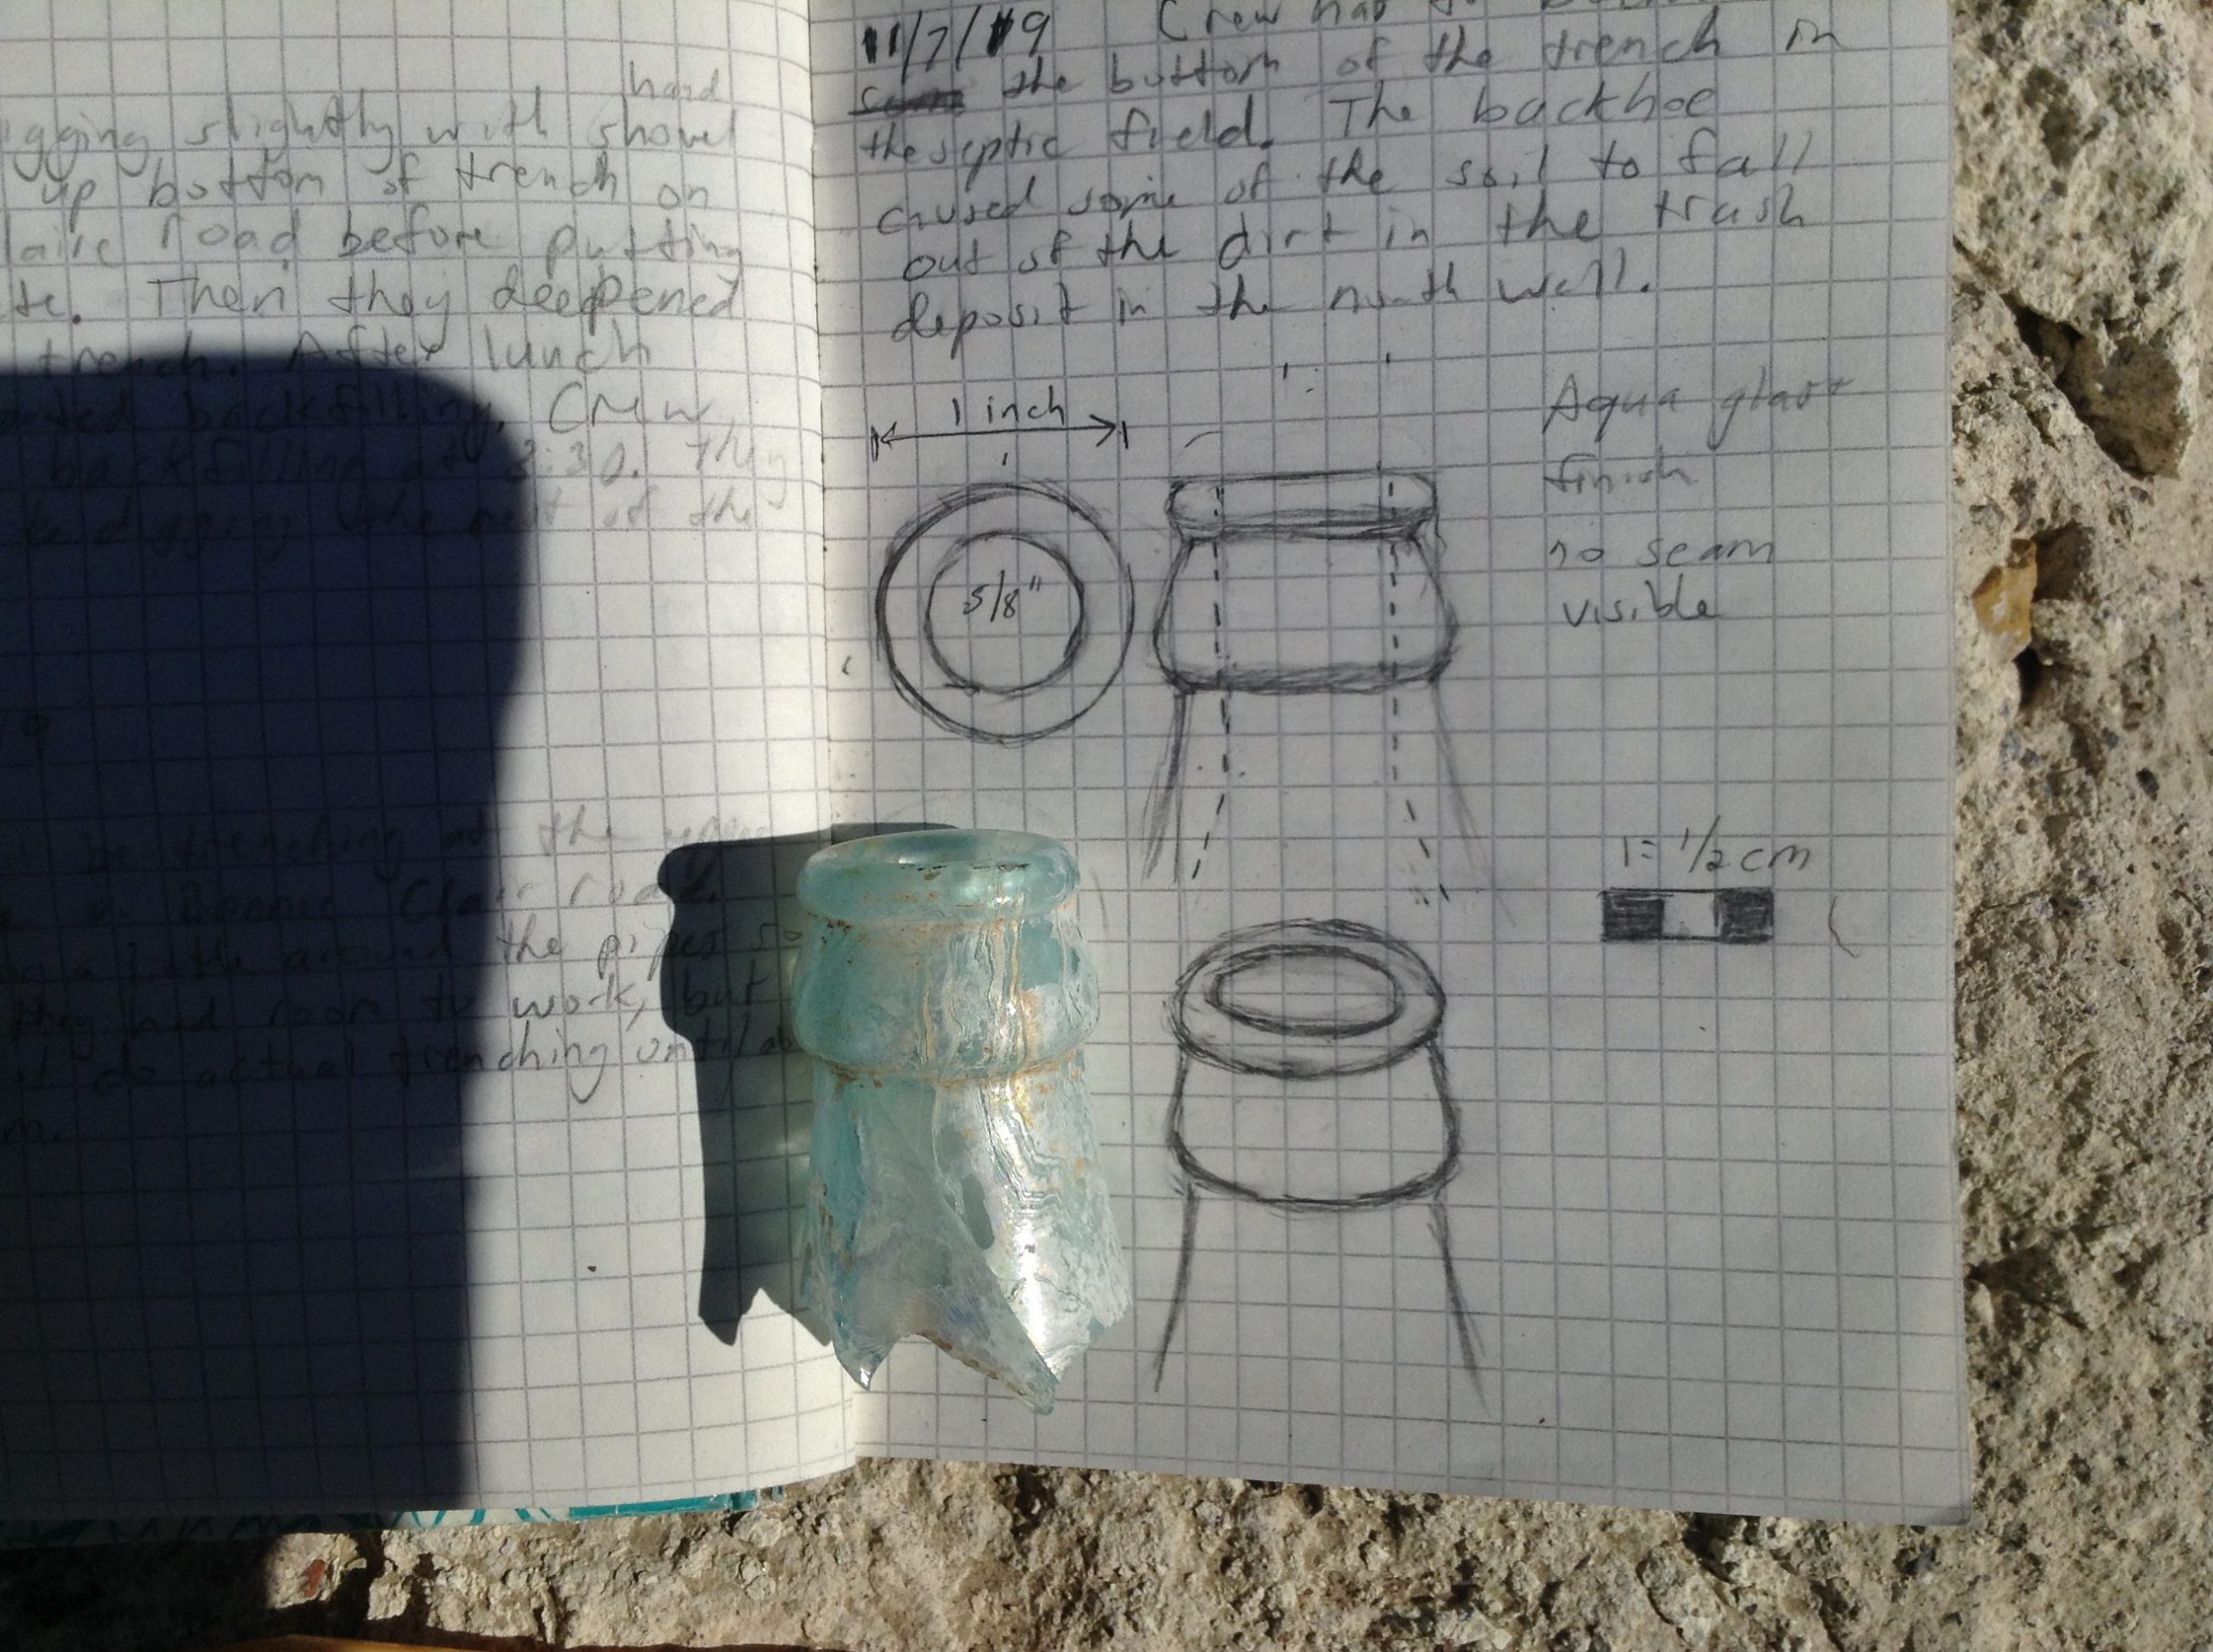 A found bottle fragment with related hand-written notes.